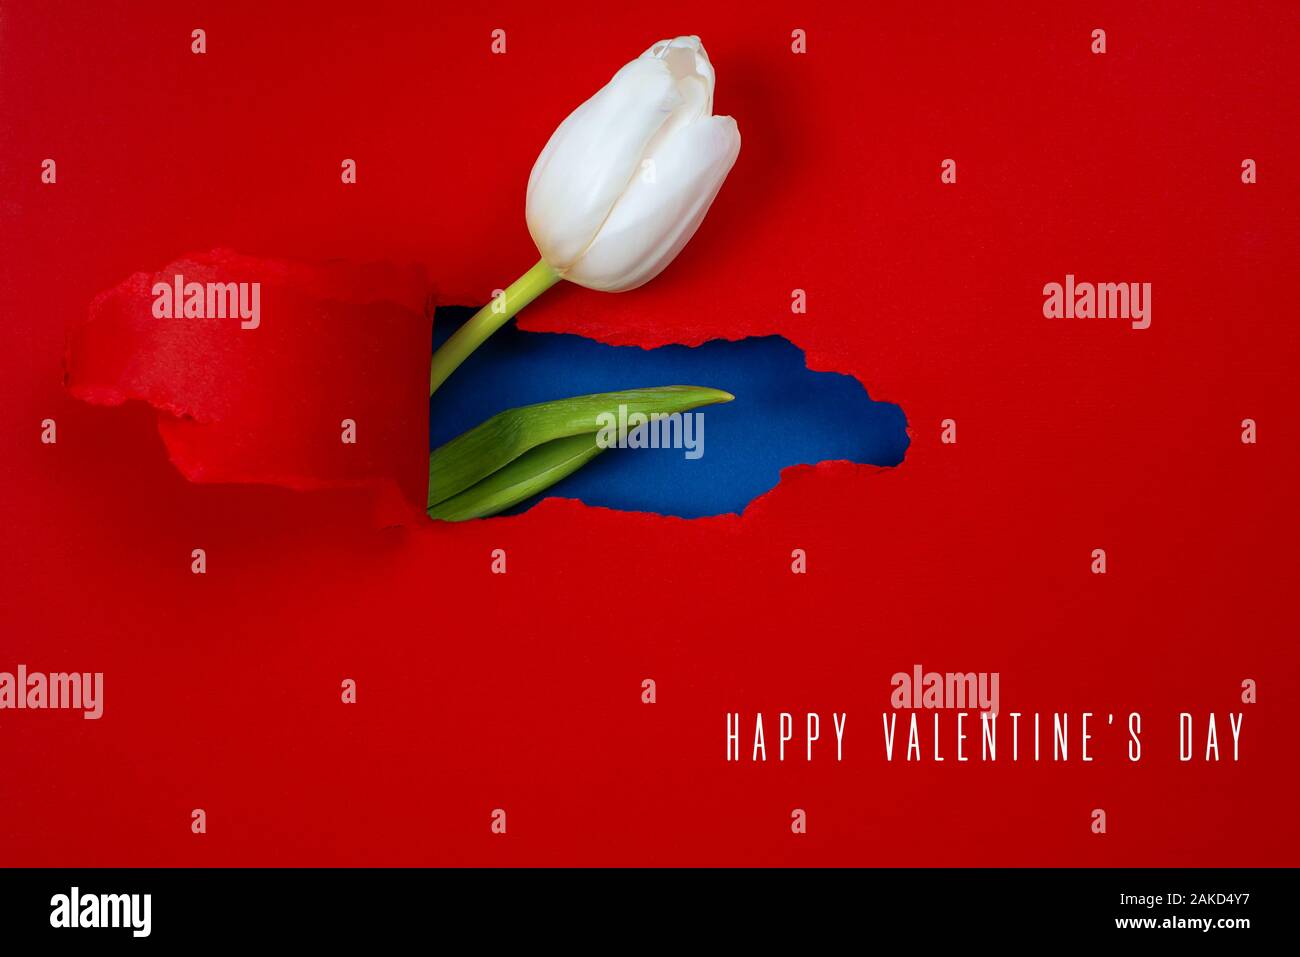 One white Tulip is visible from a hole in the red paper. Inside, a blue color and a green leaf are shown. Stock Photo